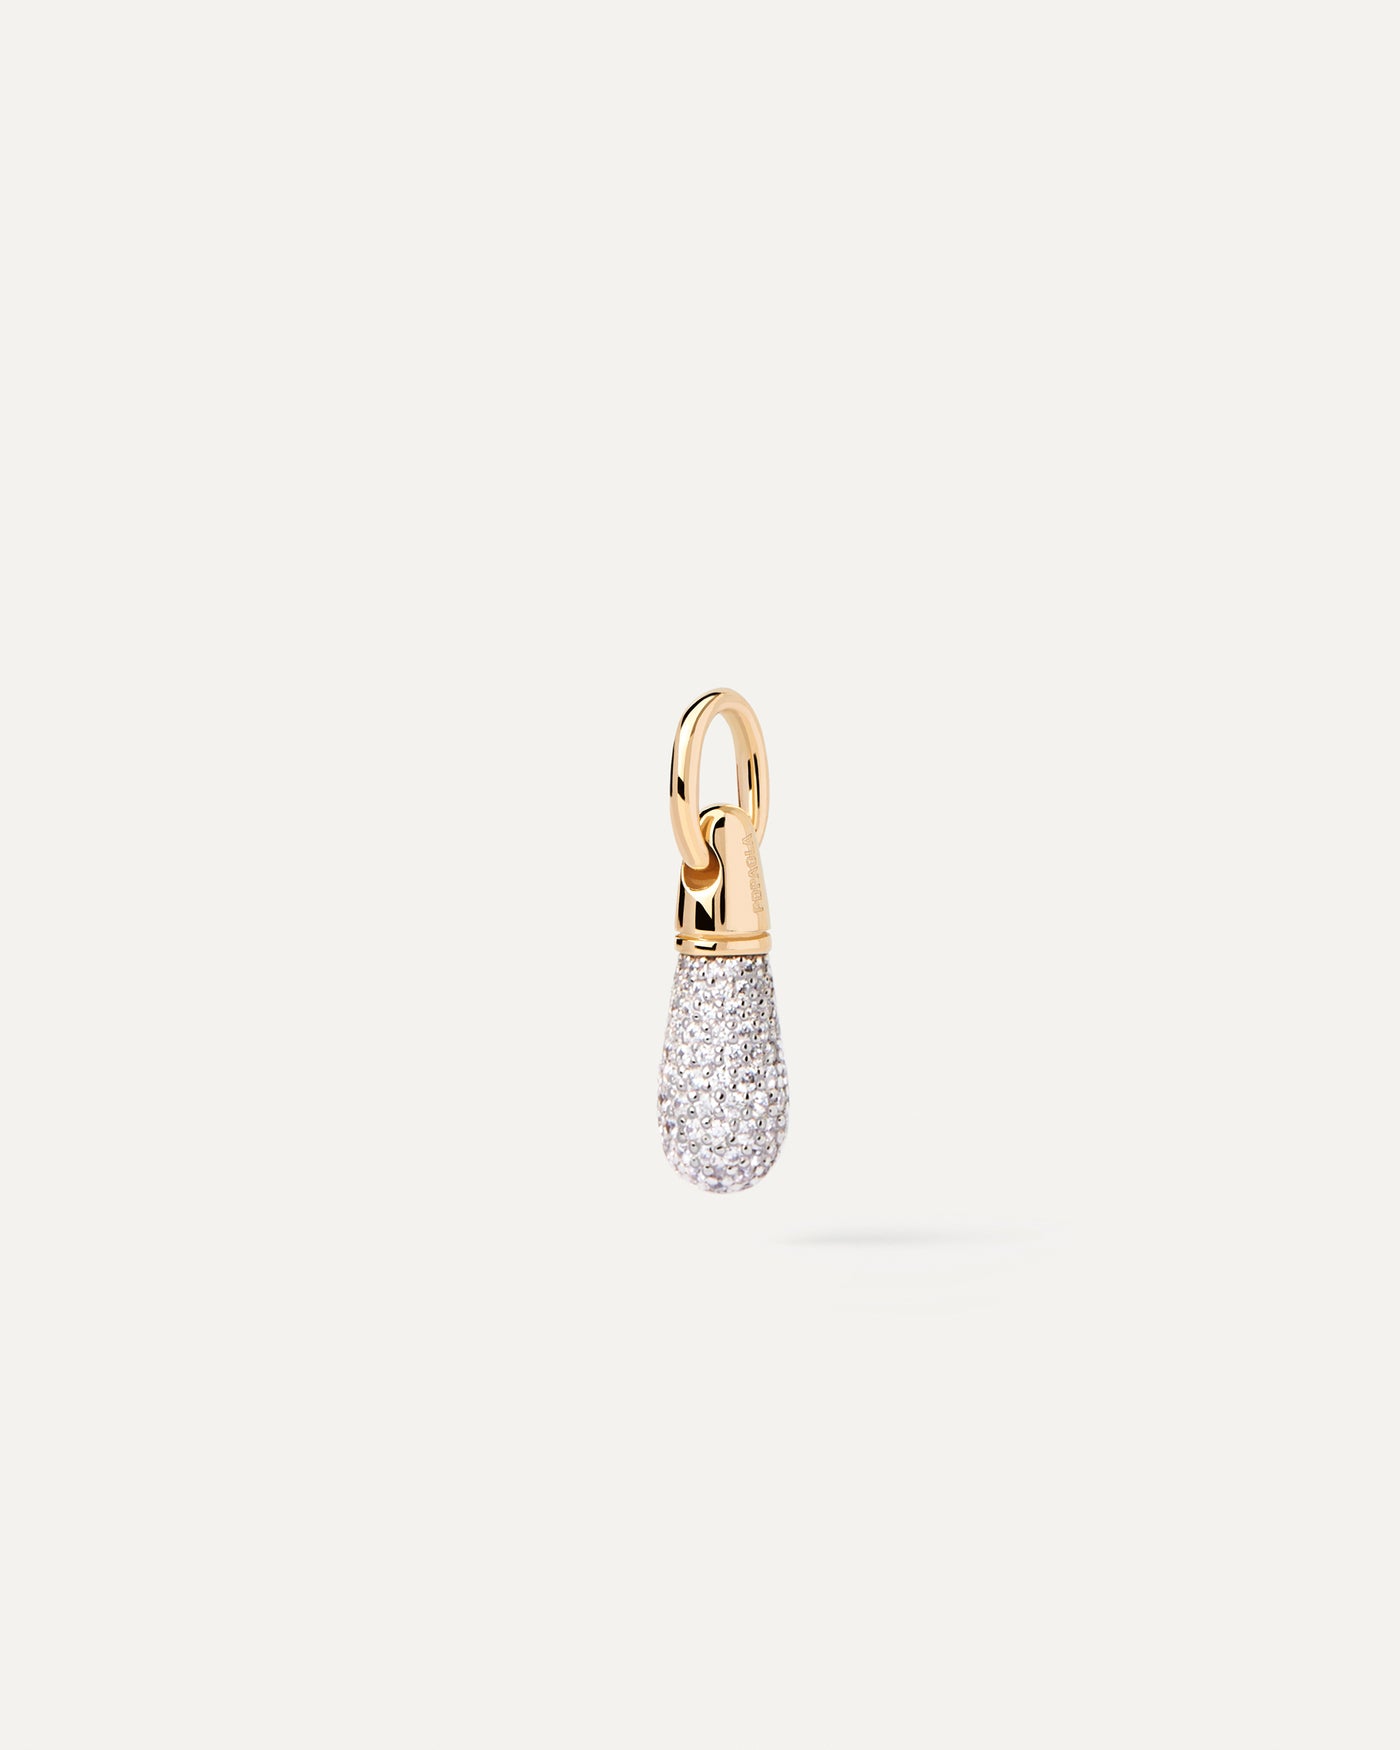 2023 Selection | Pavé Drop Pendant. Get the latest arrival from PDPAOLA. Place your order safely and get this Best Seller. Free Shipping.